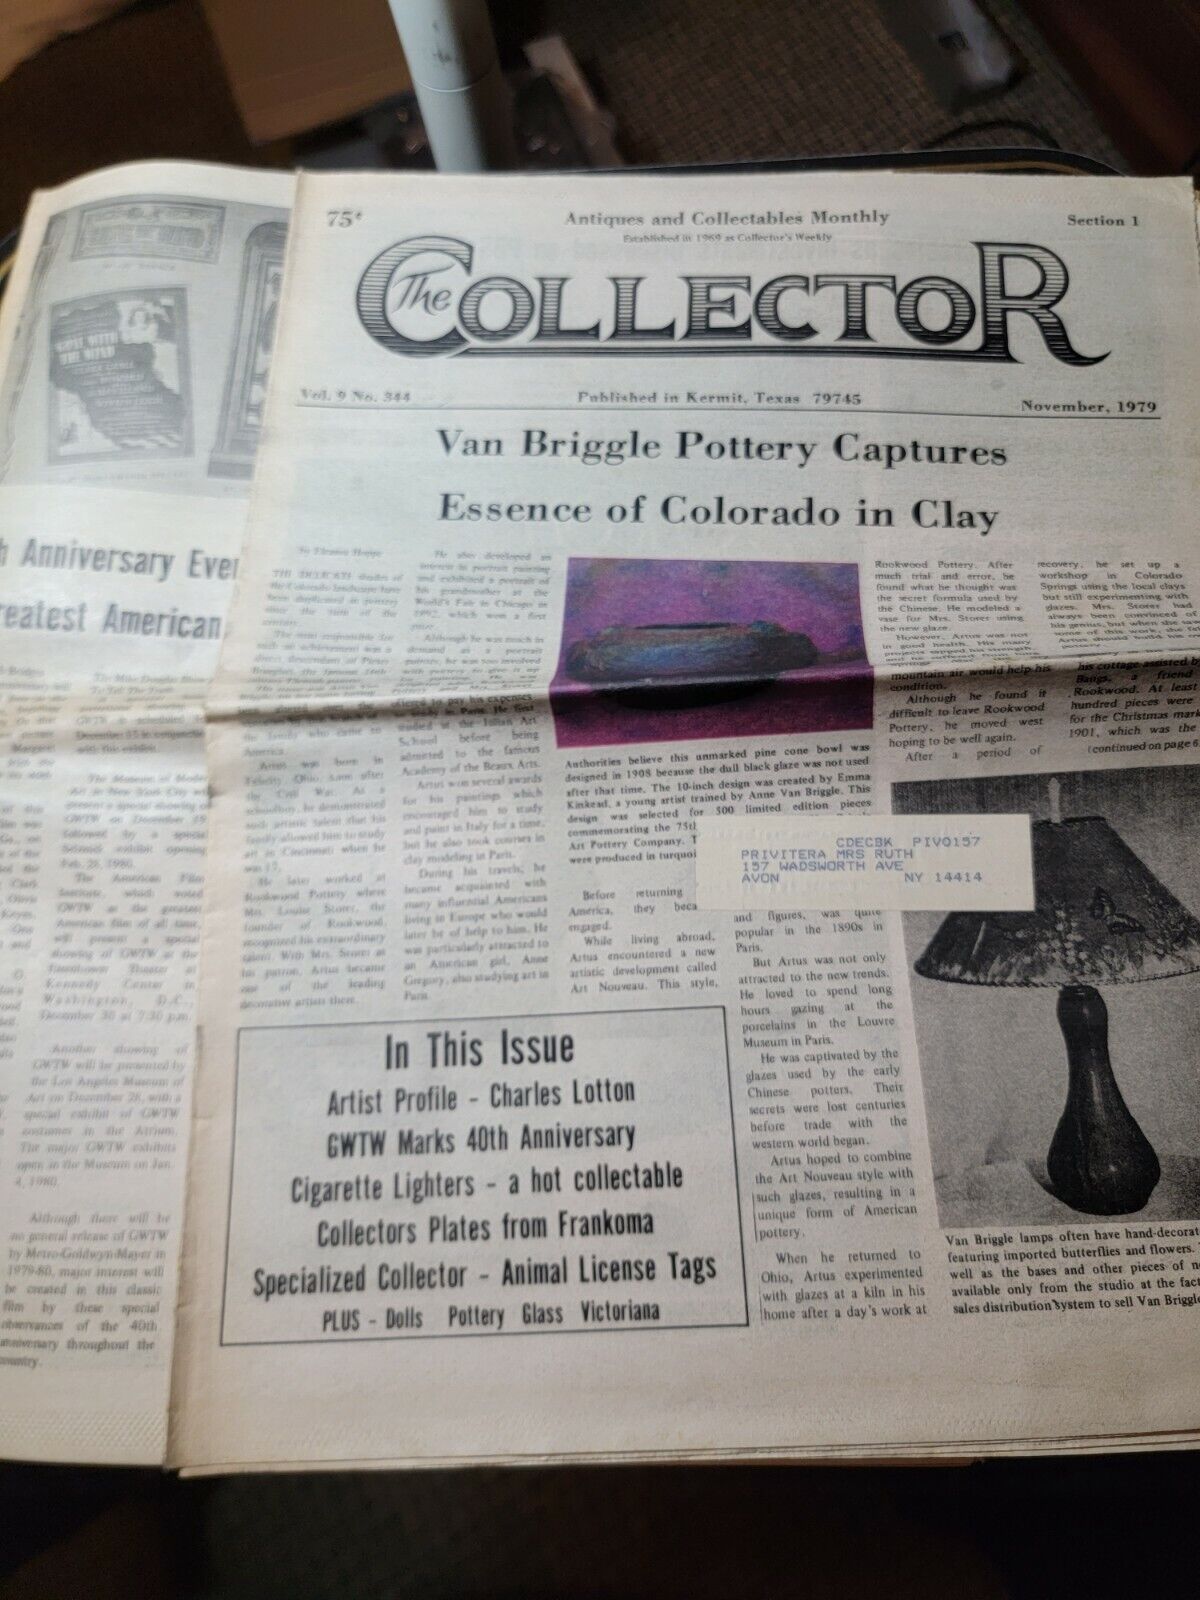 The Collector November 1979 Post Newspaper Section 1 & 2